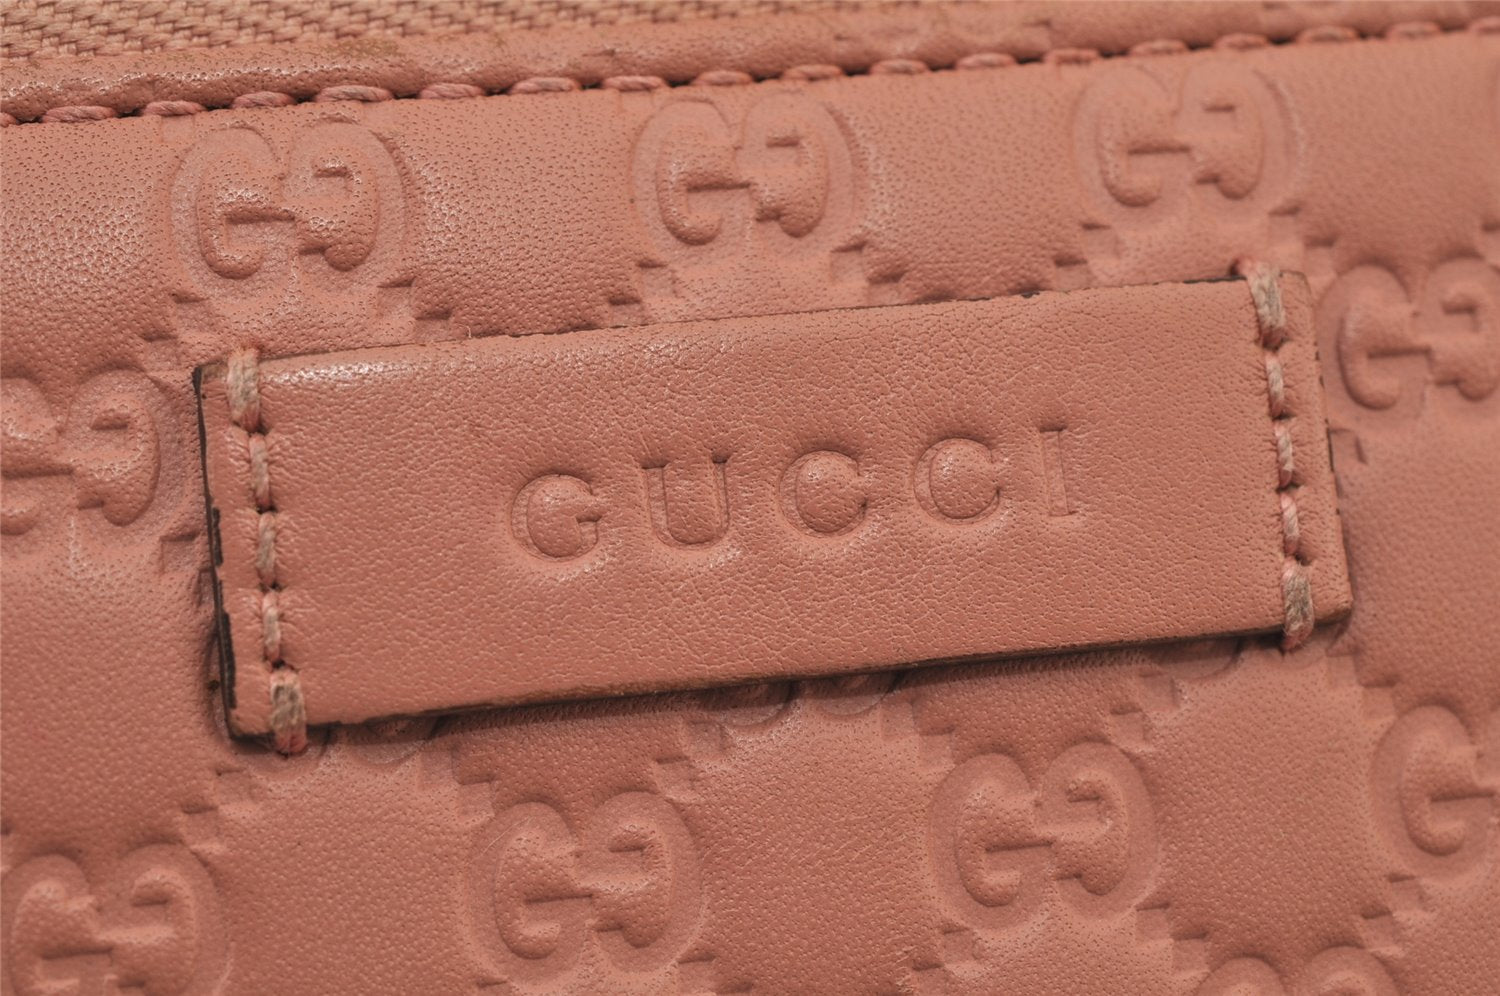 Authentic GUCCI Micro Guccissima GG Leather Long Wallet Purse 449391 Pink 7790J